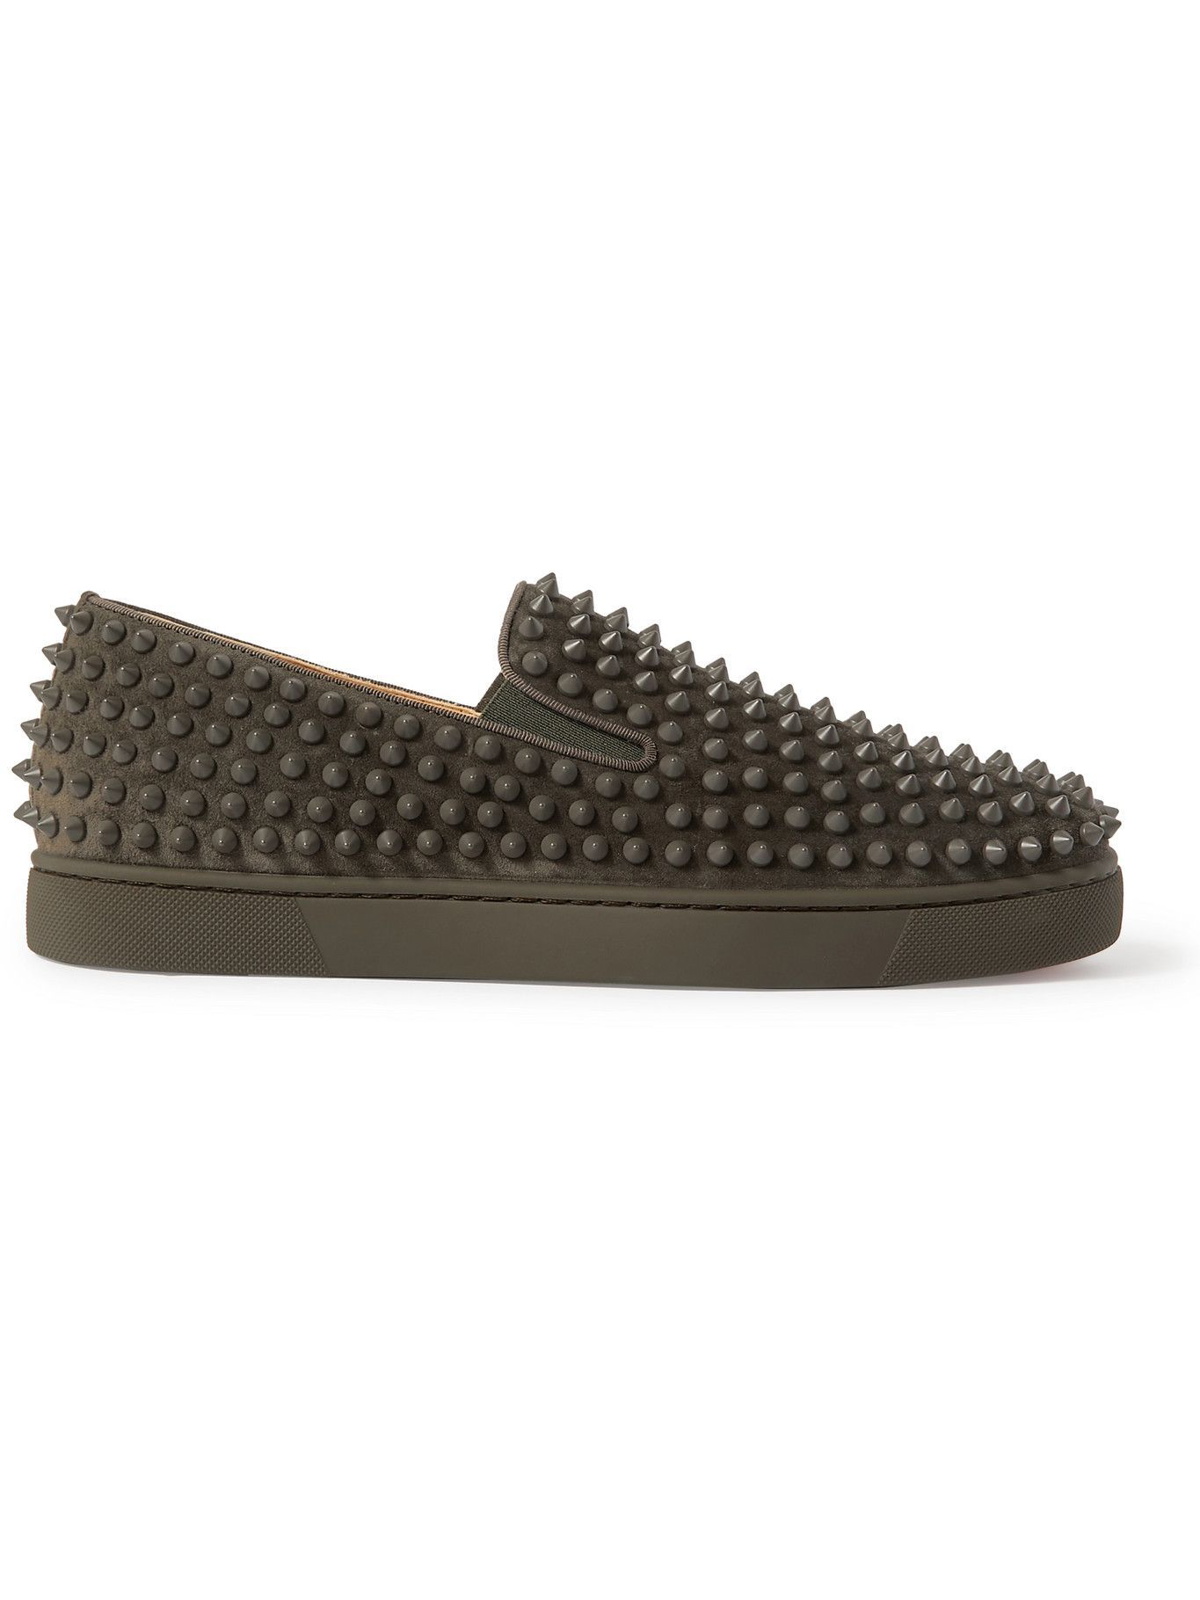 LOUBOUTIN - Spiked Suede - Gray Christian Louboutin